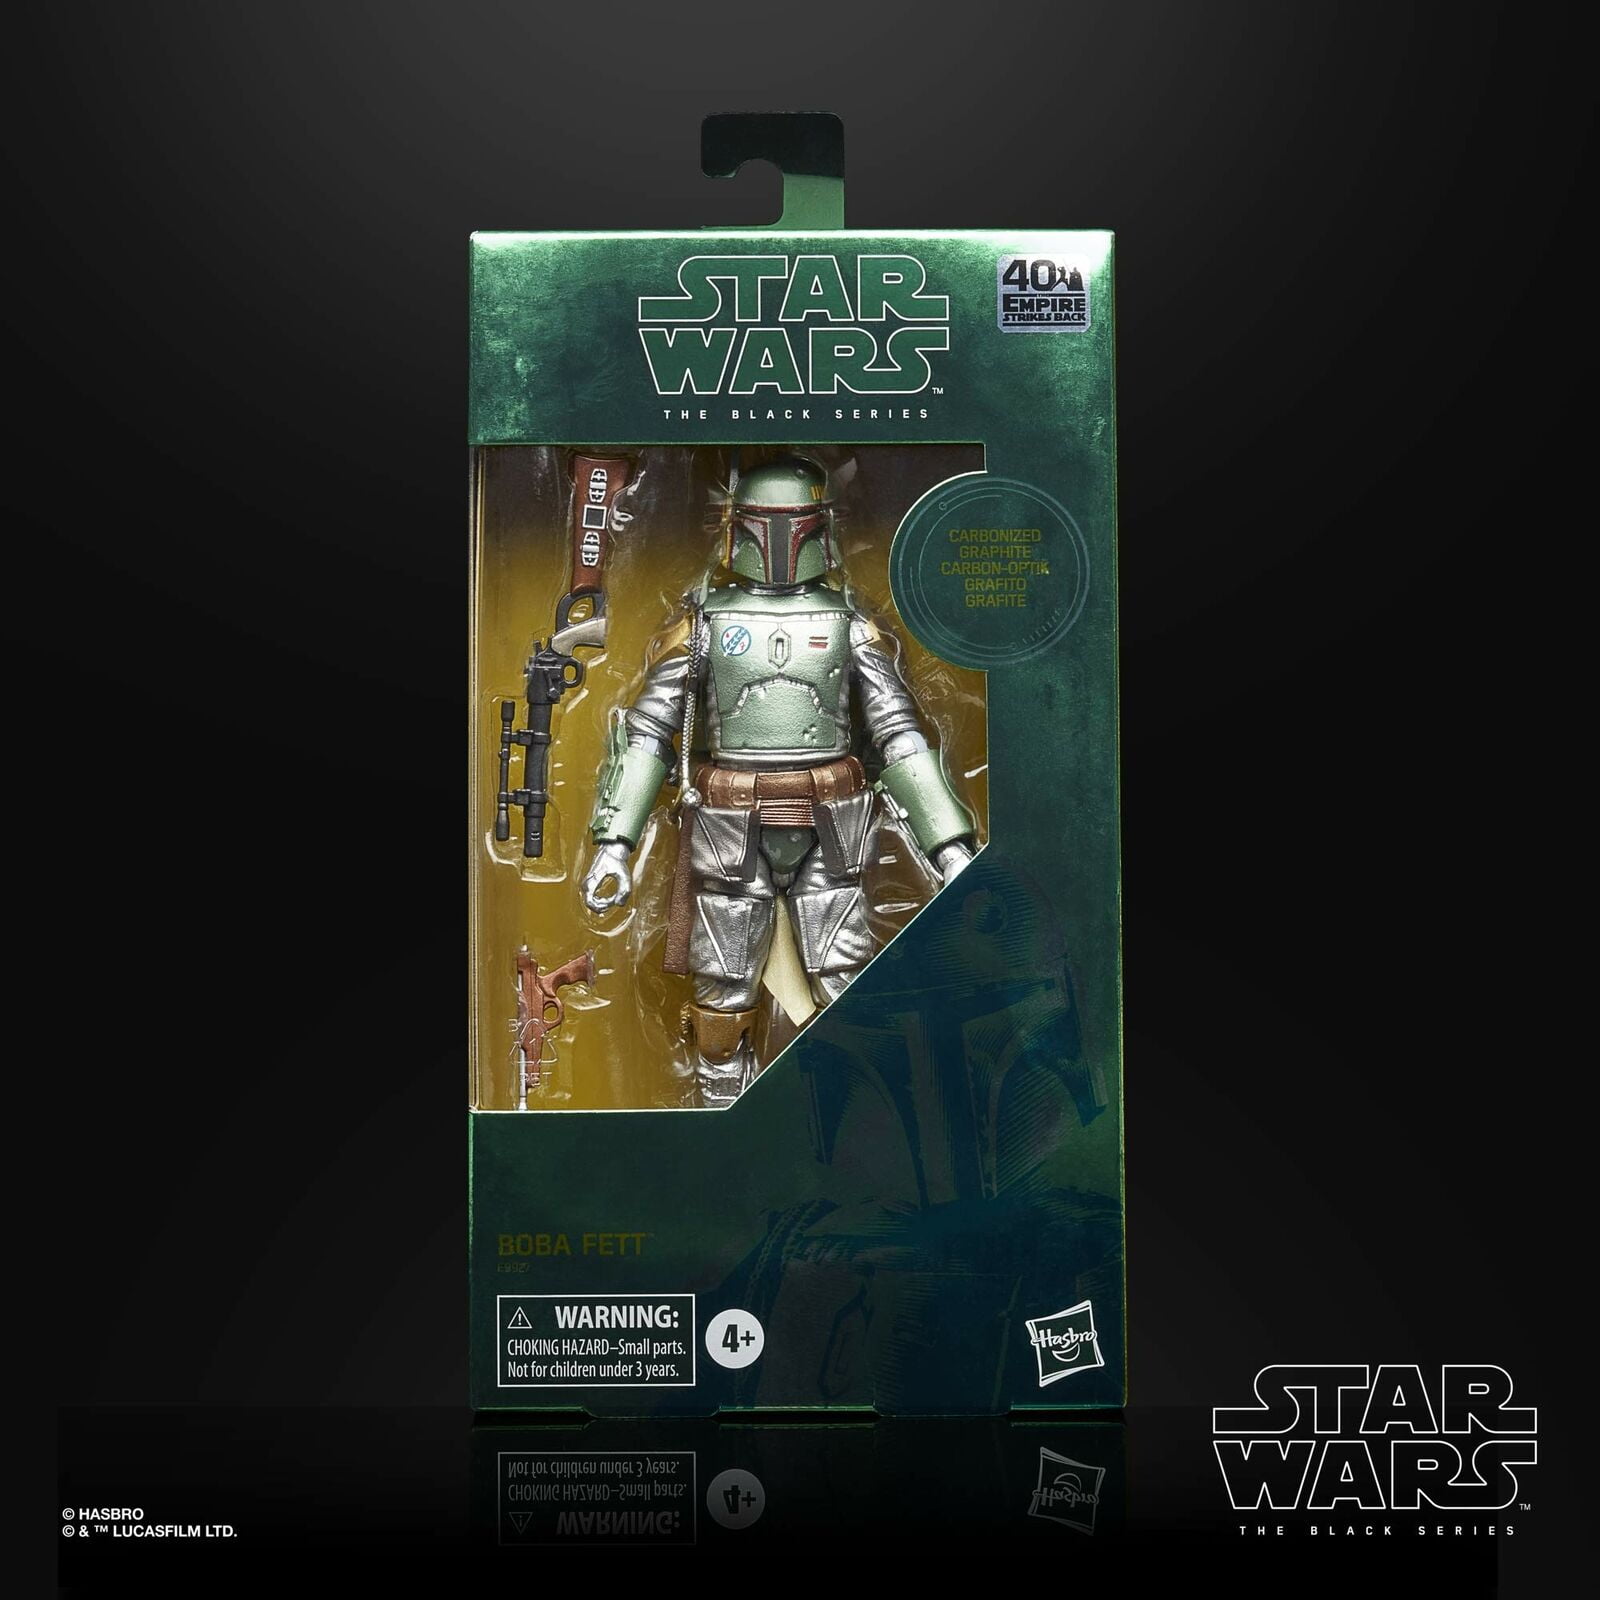 Preorder New In Box Star Wars Boba Fett Carbonized Black Series SOLD OUT